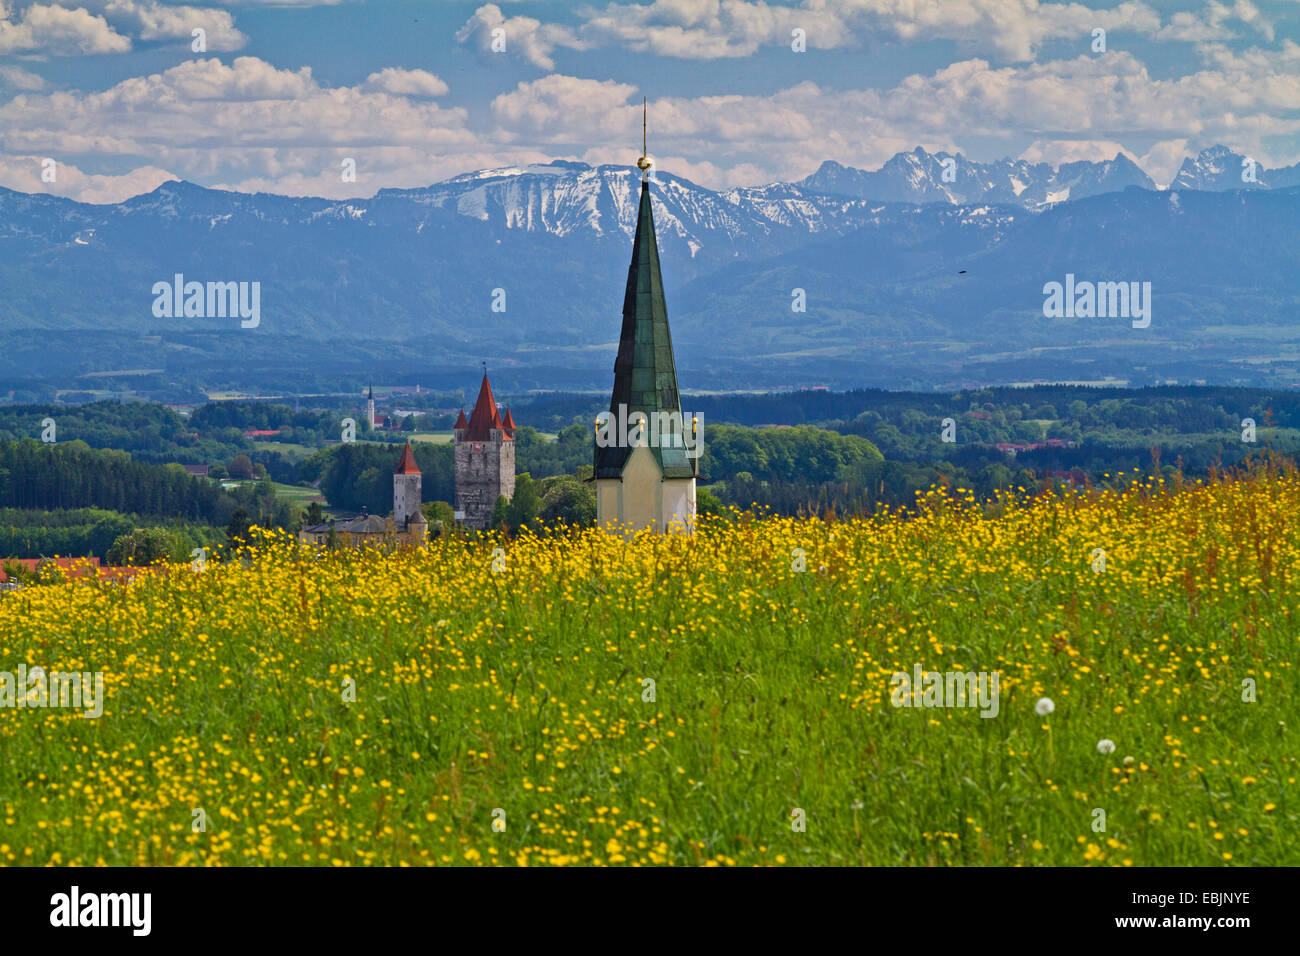 Alpine foothills, view over flower maedow, church and castle to the Alps, Germany, Bavaria, Haag Stock Photo